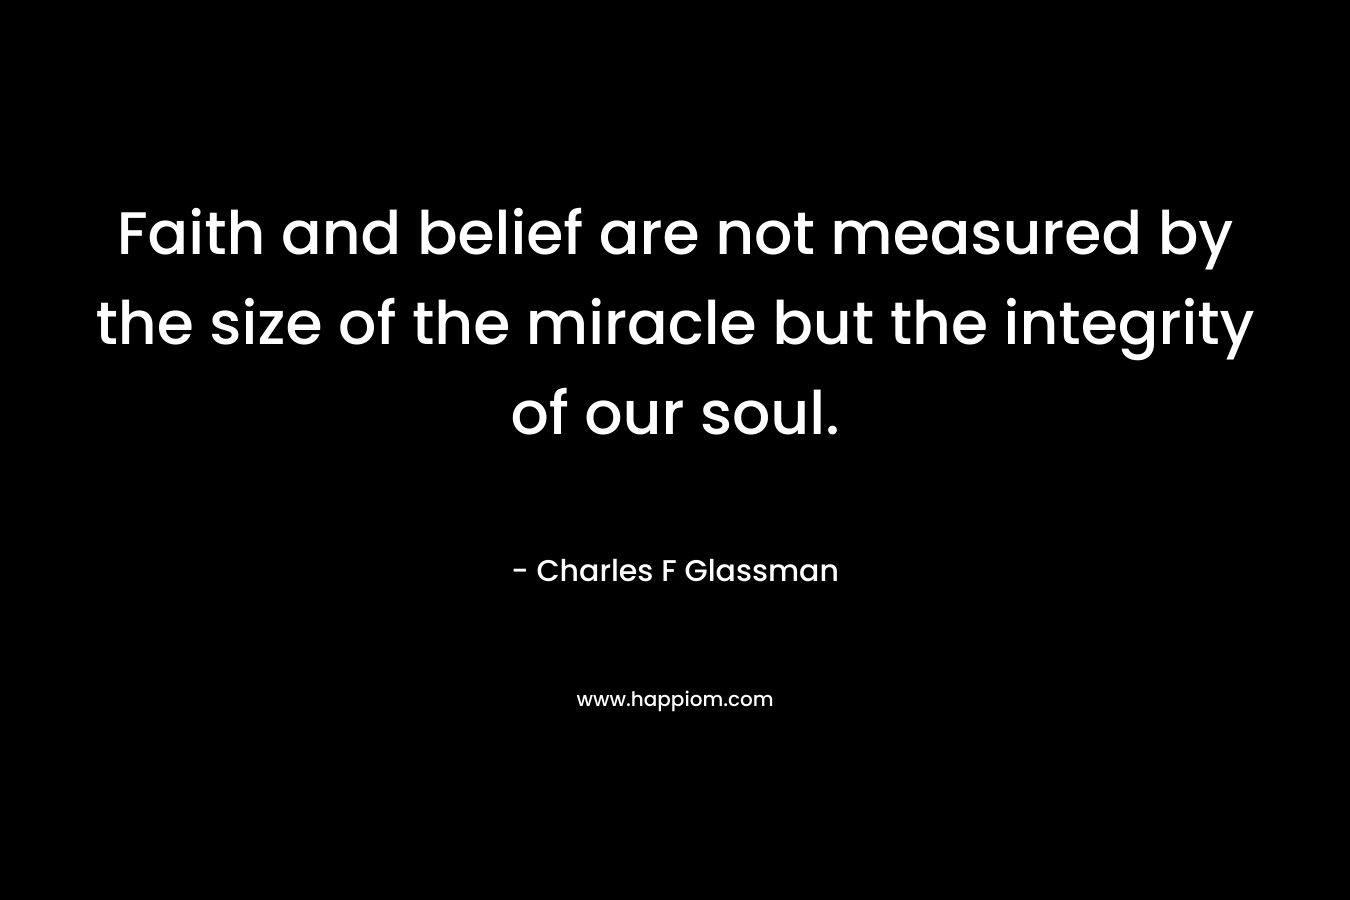 Faith and belief are not measured by the size of the miracle but the integrity of our soul.